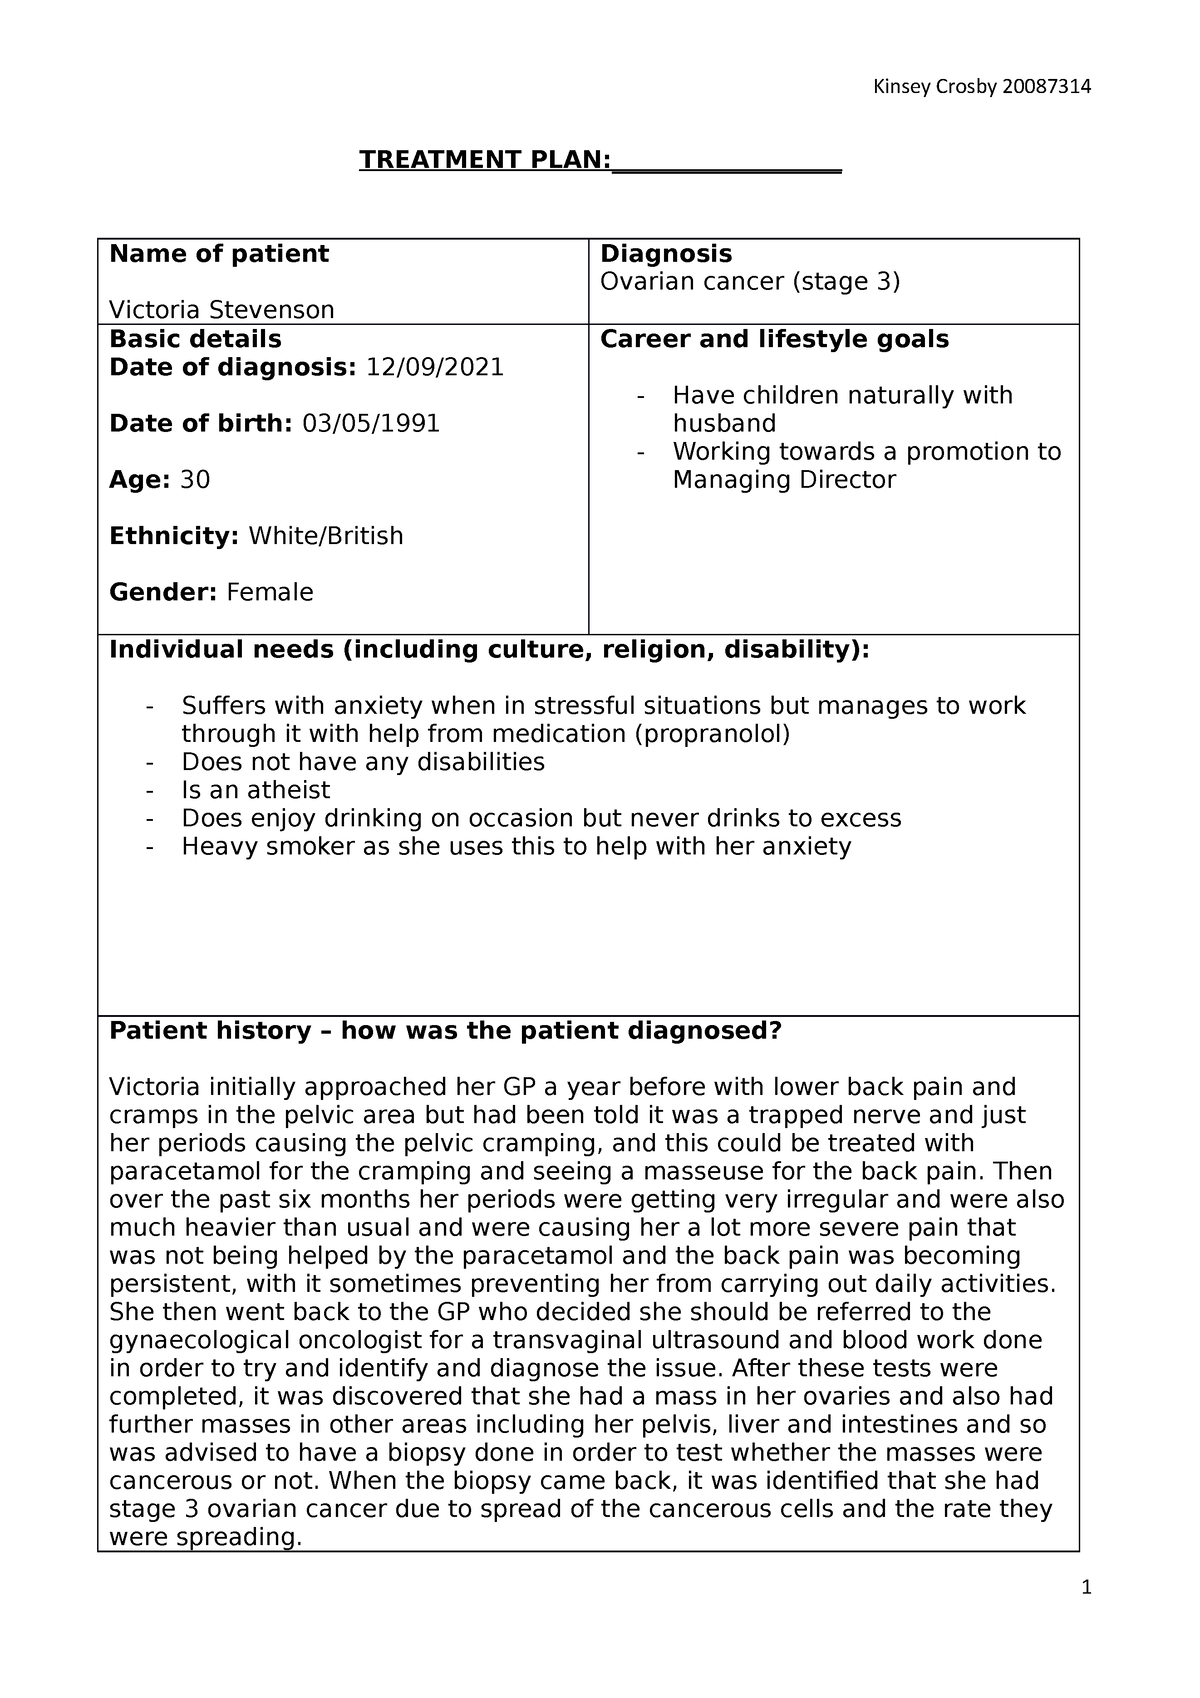 unit 14 coursework health and social care